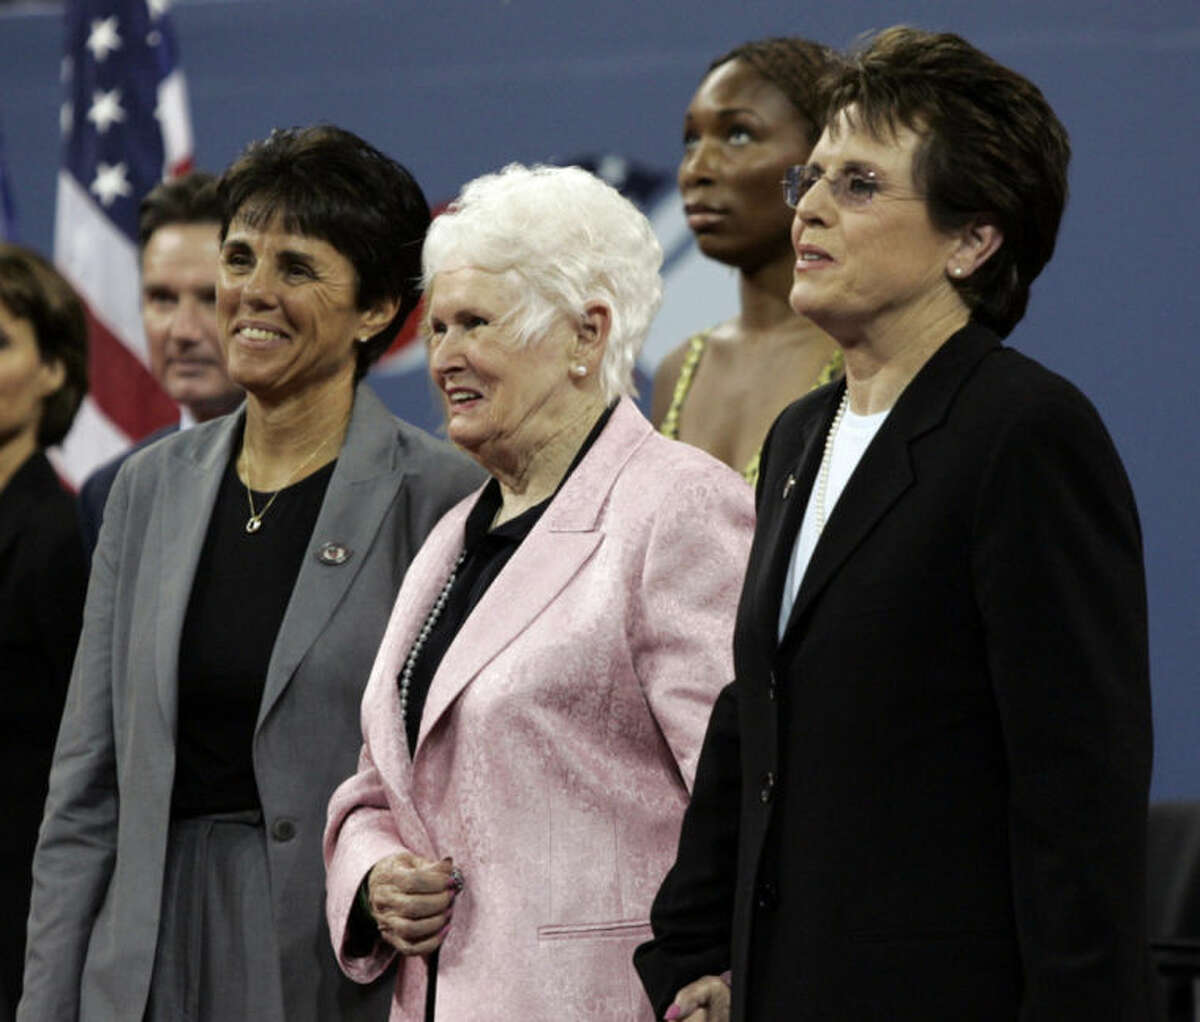 FILE - In this Aug. 28, 2006 file photo, Billie Jean King stands with her mother, Betty Moffitt, center, and girlfriend Ilana Kloss, left, during the dedication ceremony for the USTA National Tennis Center, re-named in King's honor, at the U.S. Open tennis tournament in New York. Moffitt, the mother of Billie Jean King and former major league pitcher Randy Moffitt, has died in Prescott, Ariz. She was 91. King's publicist says she died Friday, Feb. 7, 2014, at home with her children by her side. (AP Photo/Elise Amendola, File)